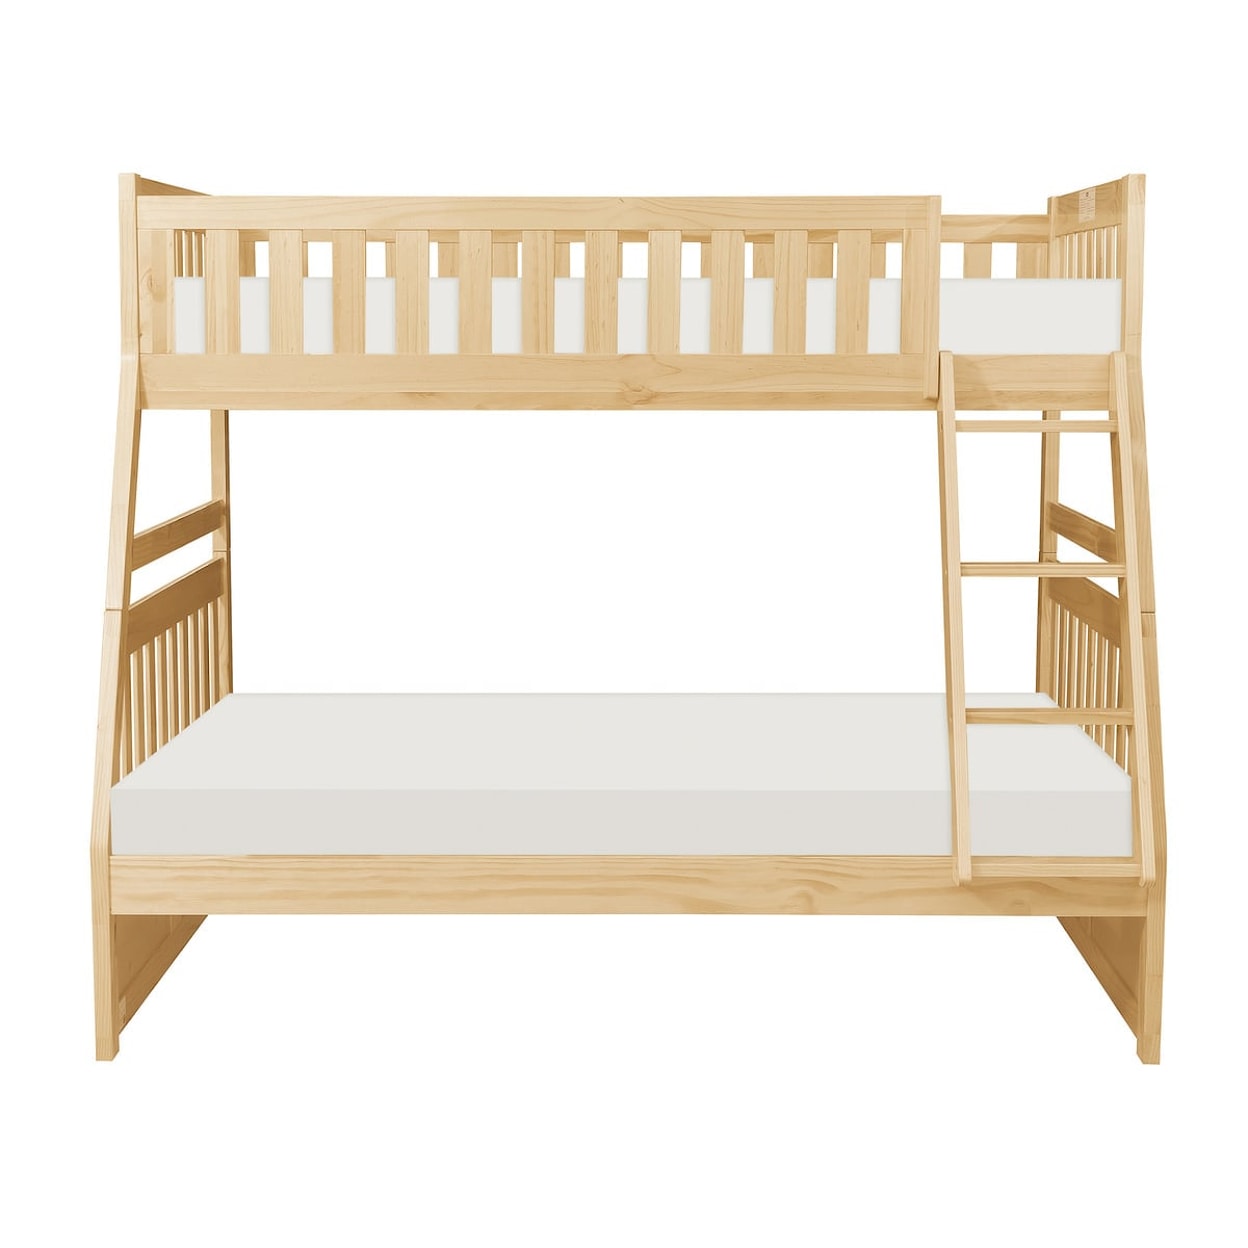 Homelegance Bartly Twin/Full Bunk Bed